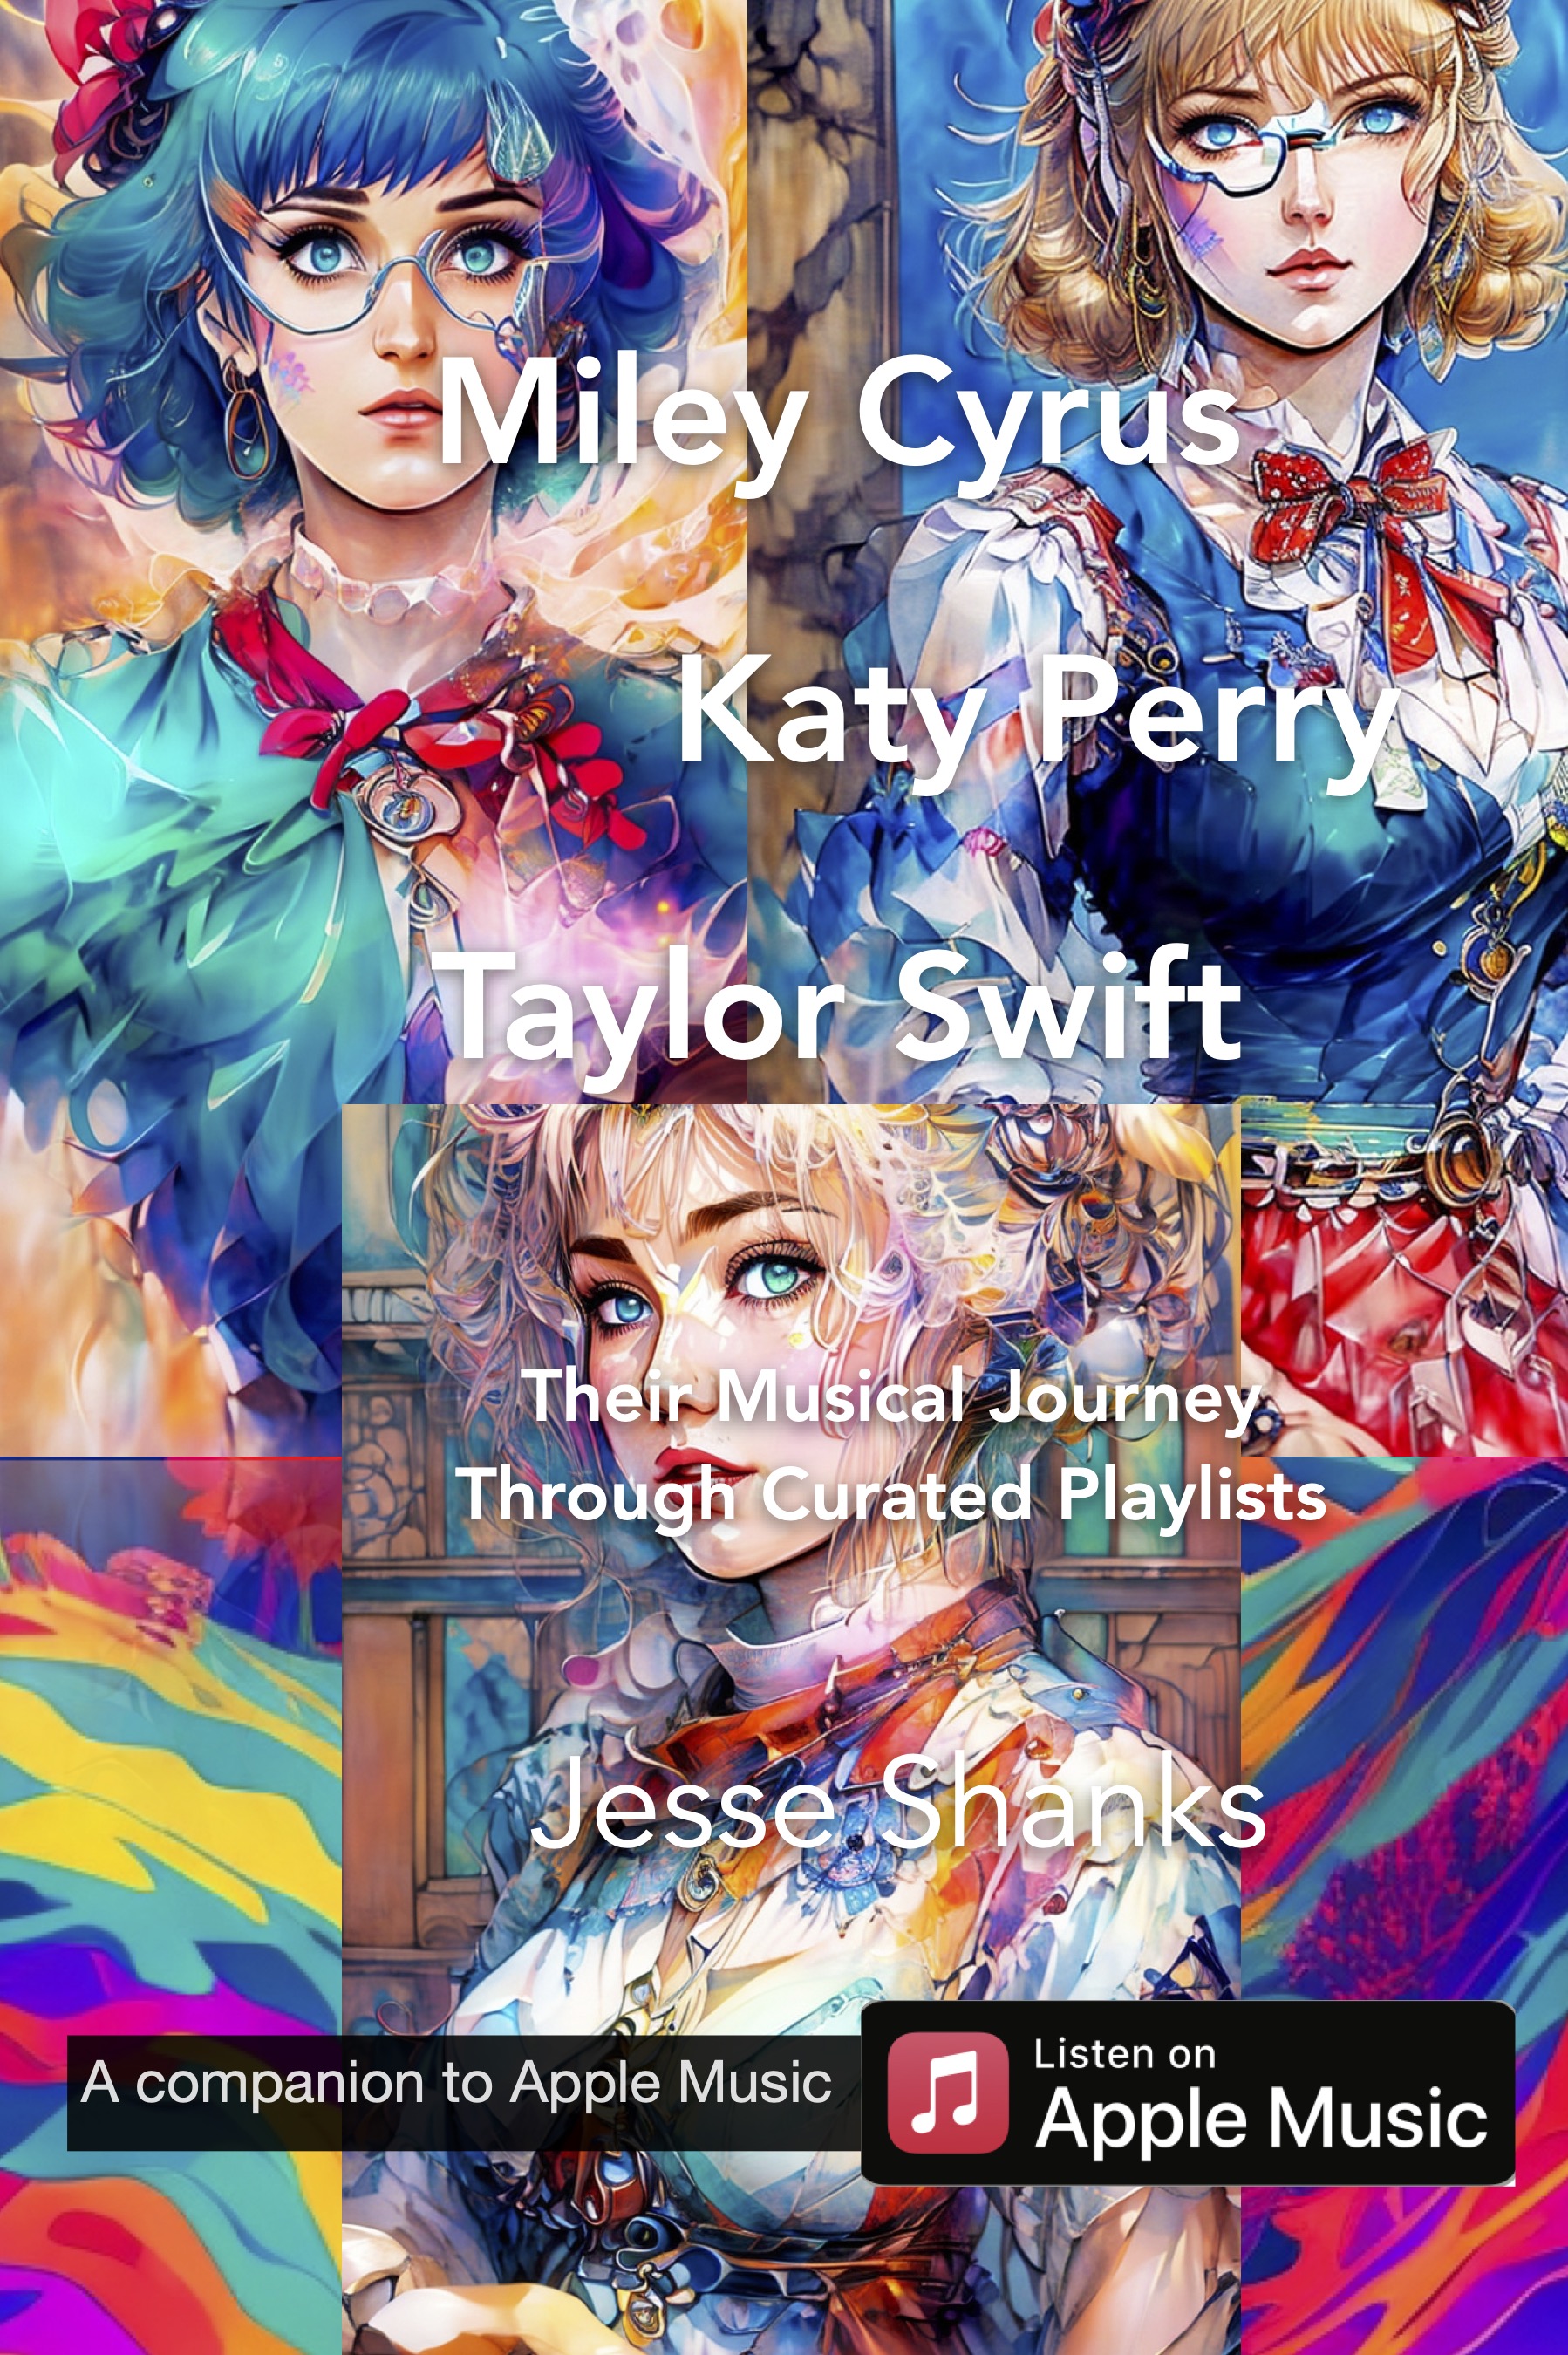 Miley Cyrus,  Katy Perry, Taylor Swift